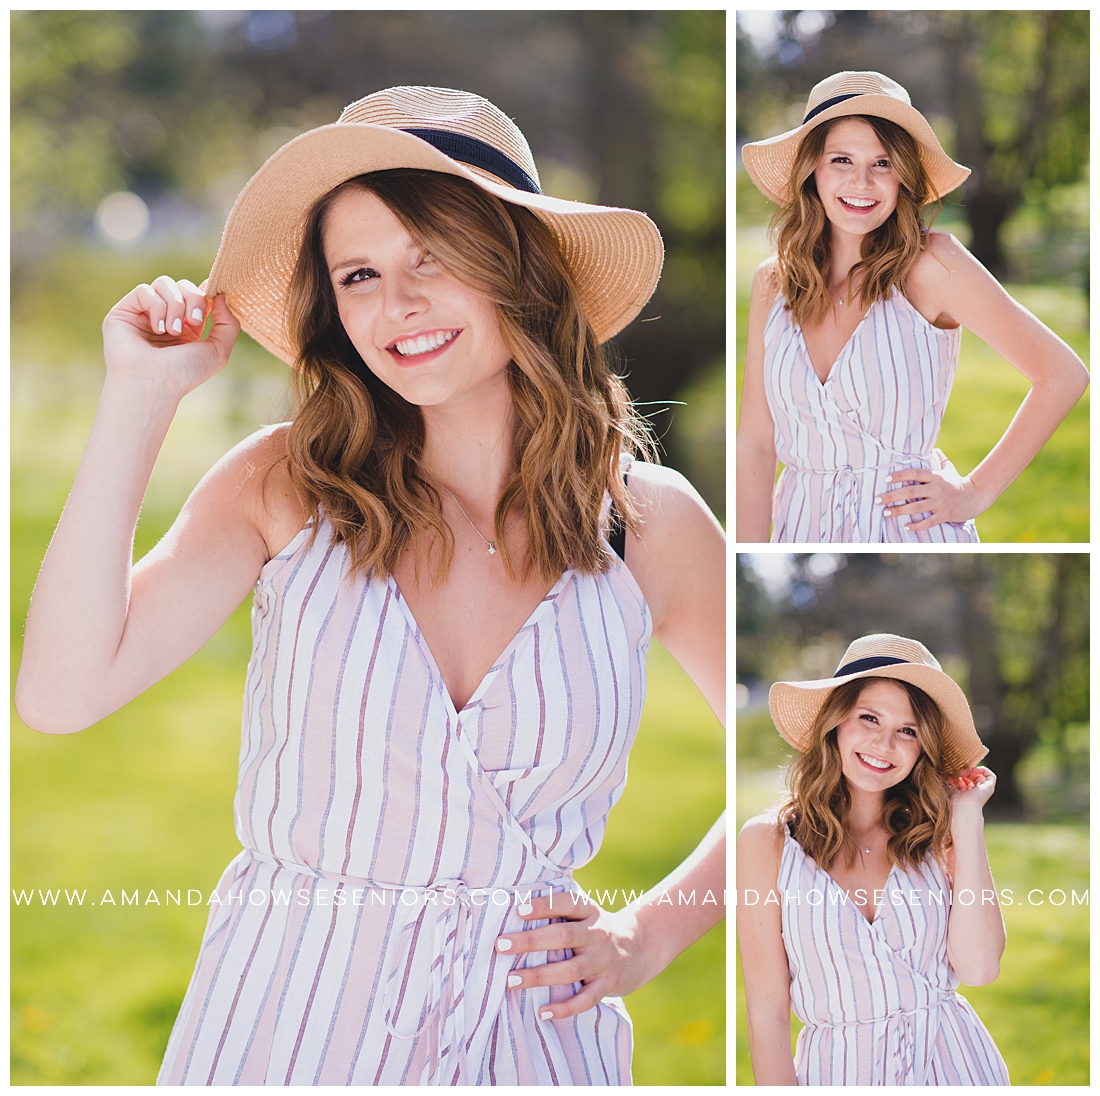 Cute Wright Park Senior Portraits with Straw Hat and Striped Dress in the Summer with Tacoma Senior Photographer Amanda Howse